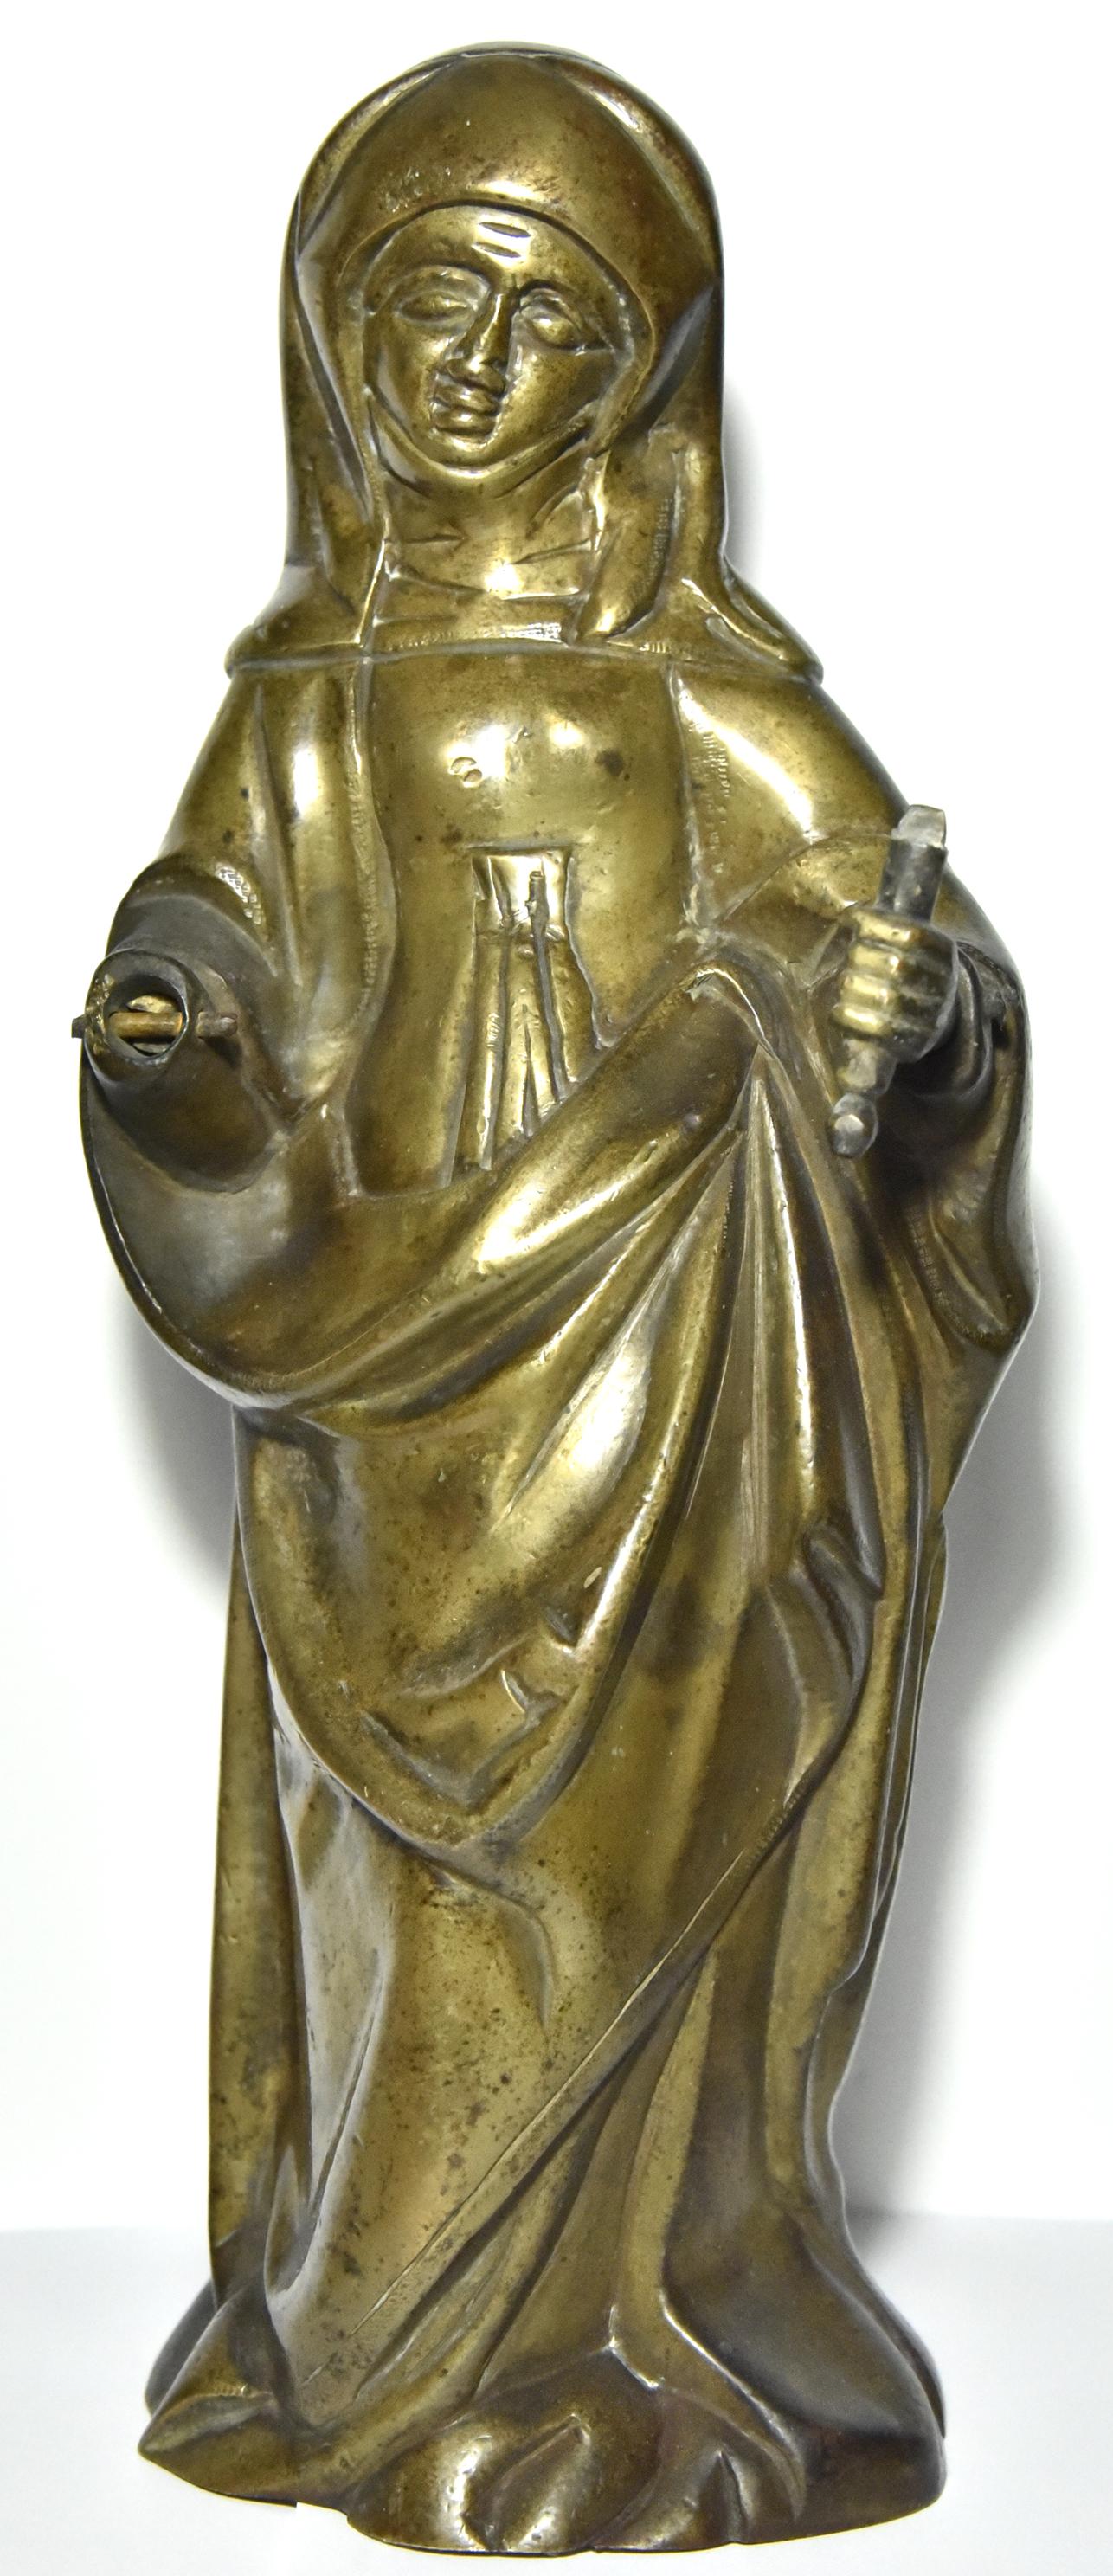 Unknown Figurative Sculpture - Figure of a saint in bronze, late 15th century, southern Netherlands